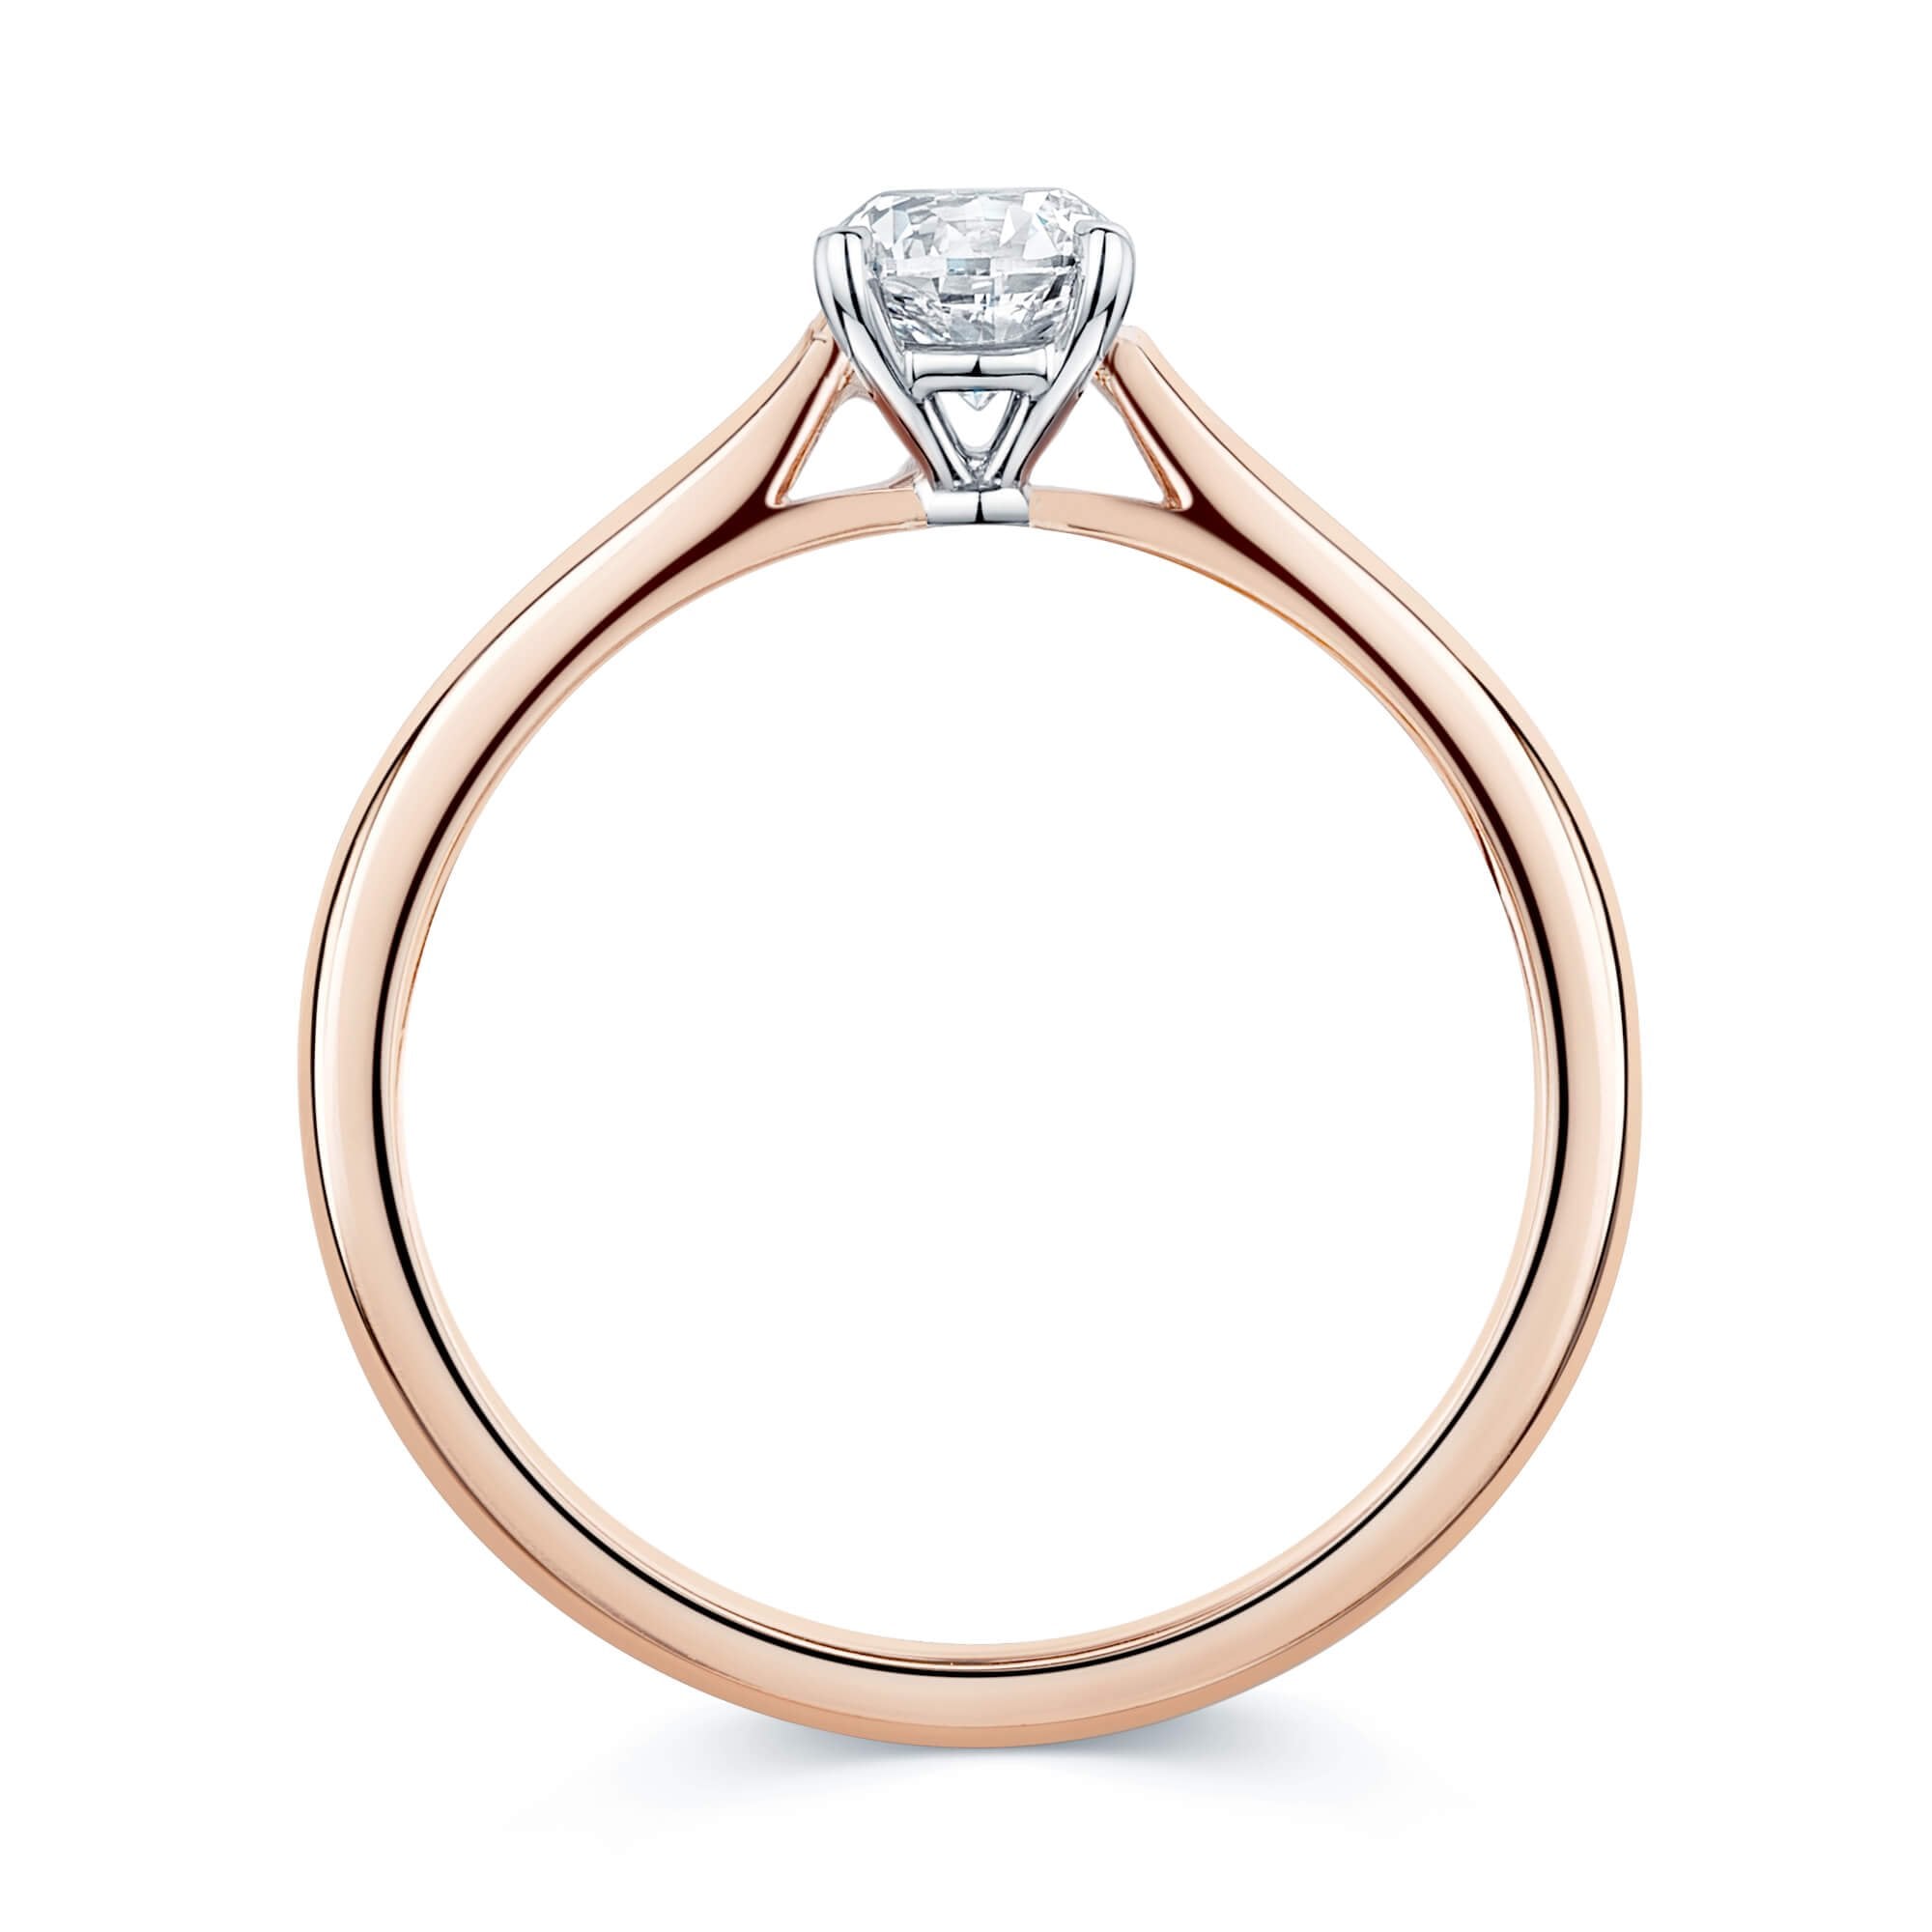 Simply Solitaire Collection 18ct Rose Gold Diamond Solitaire Engagement Ring GIA Certified 0.50 Carat